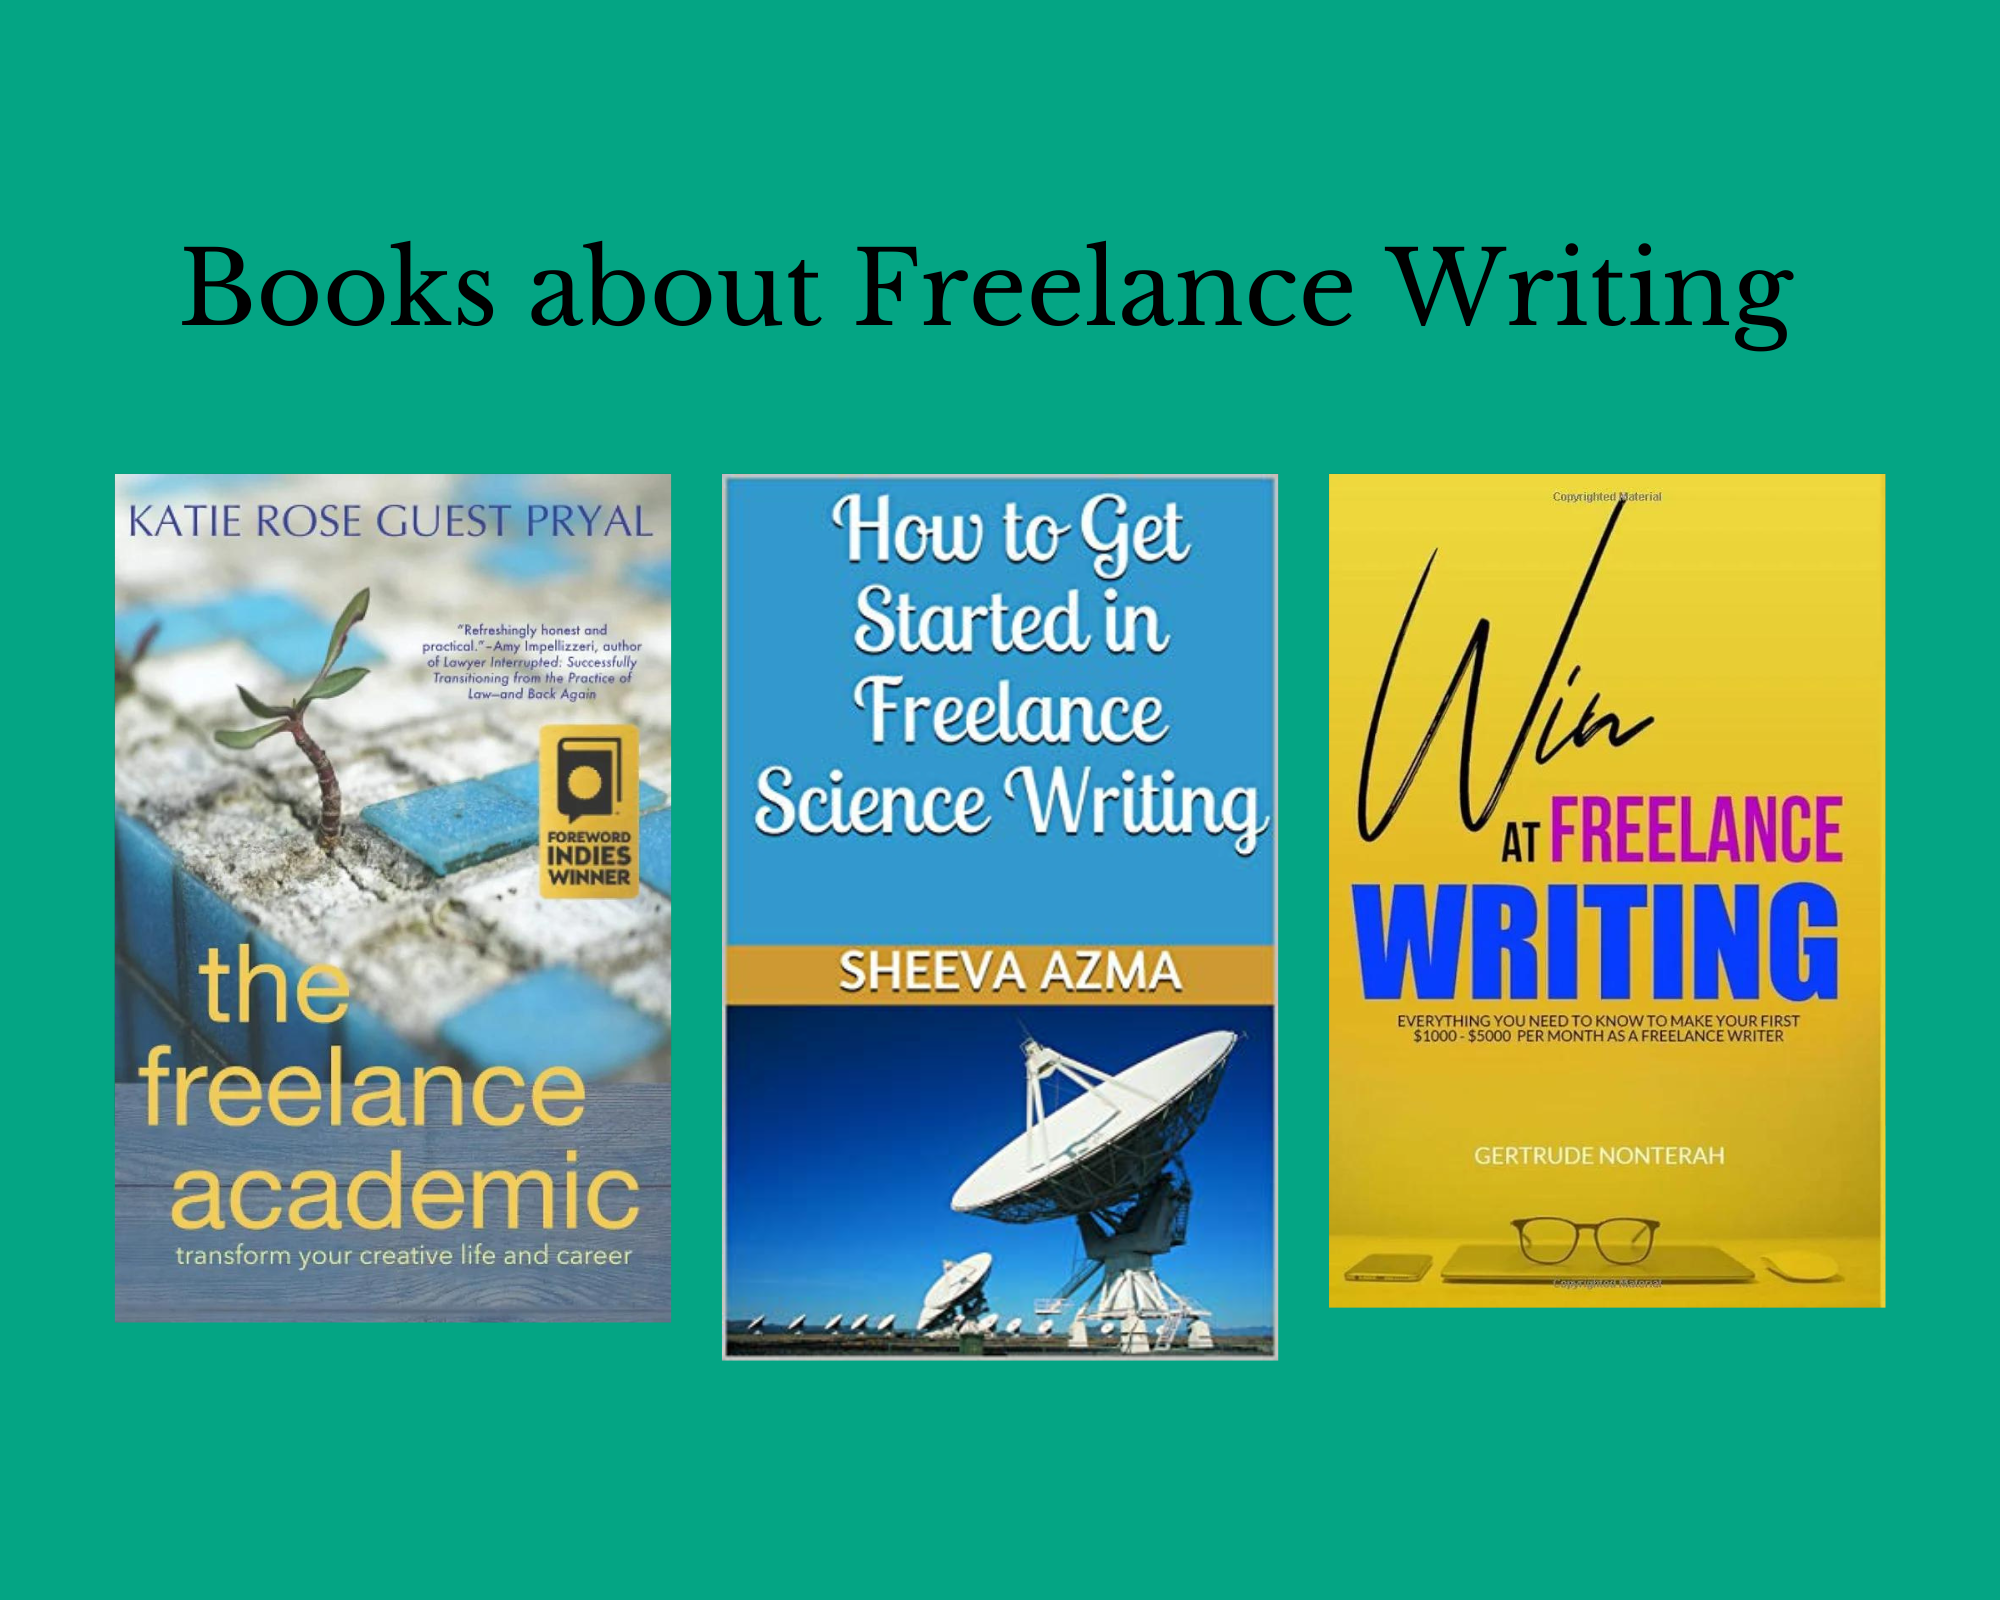 Book covers of The Freelance Academic, How to Get Started in Freelance Science Writing, and Win at Freelance Writing 